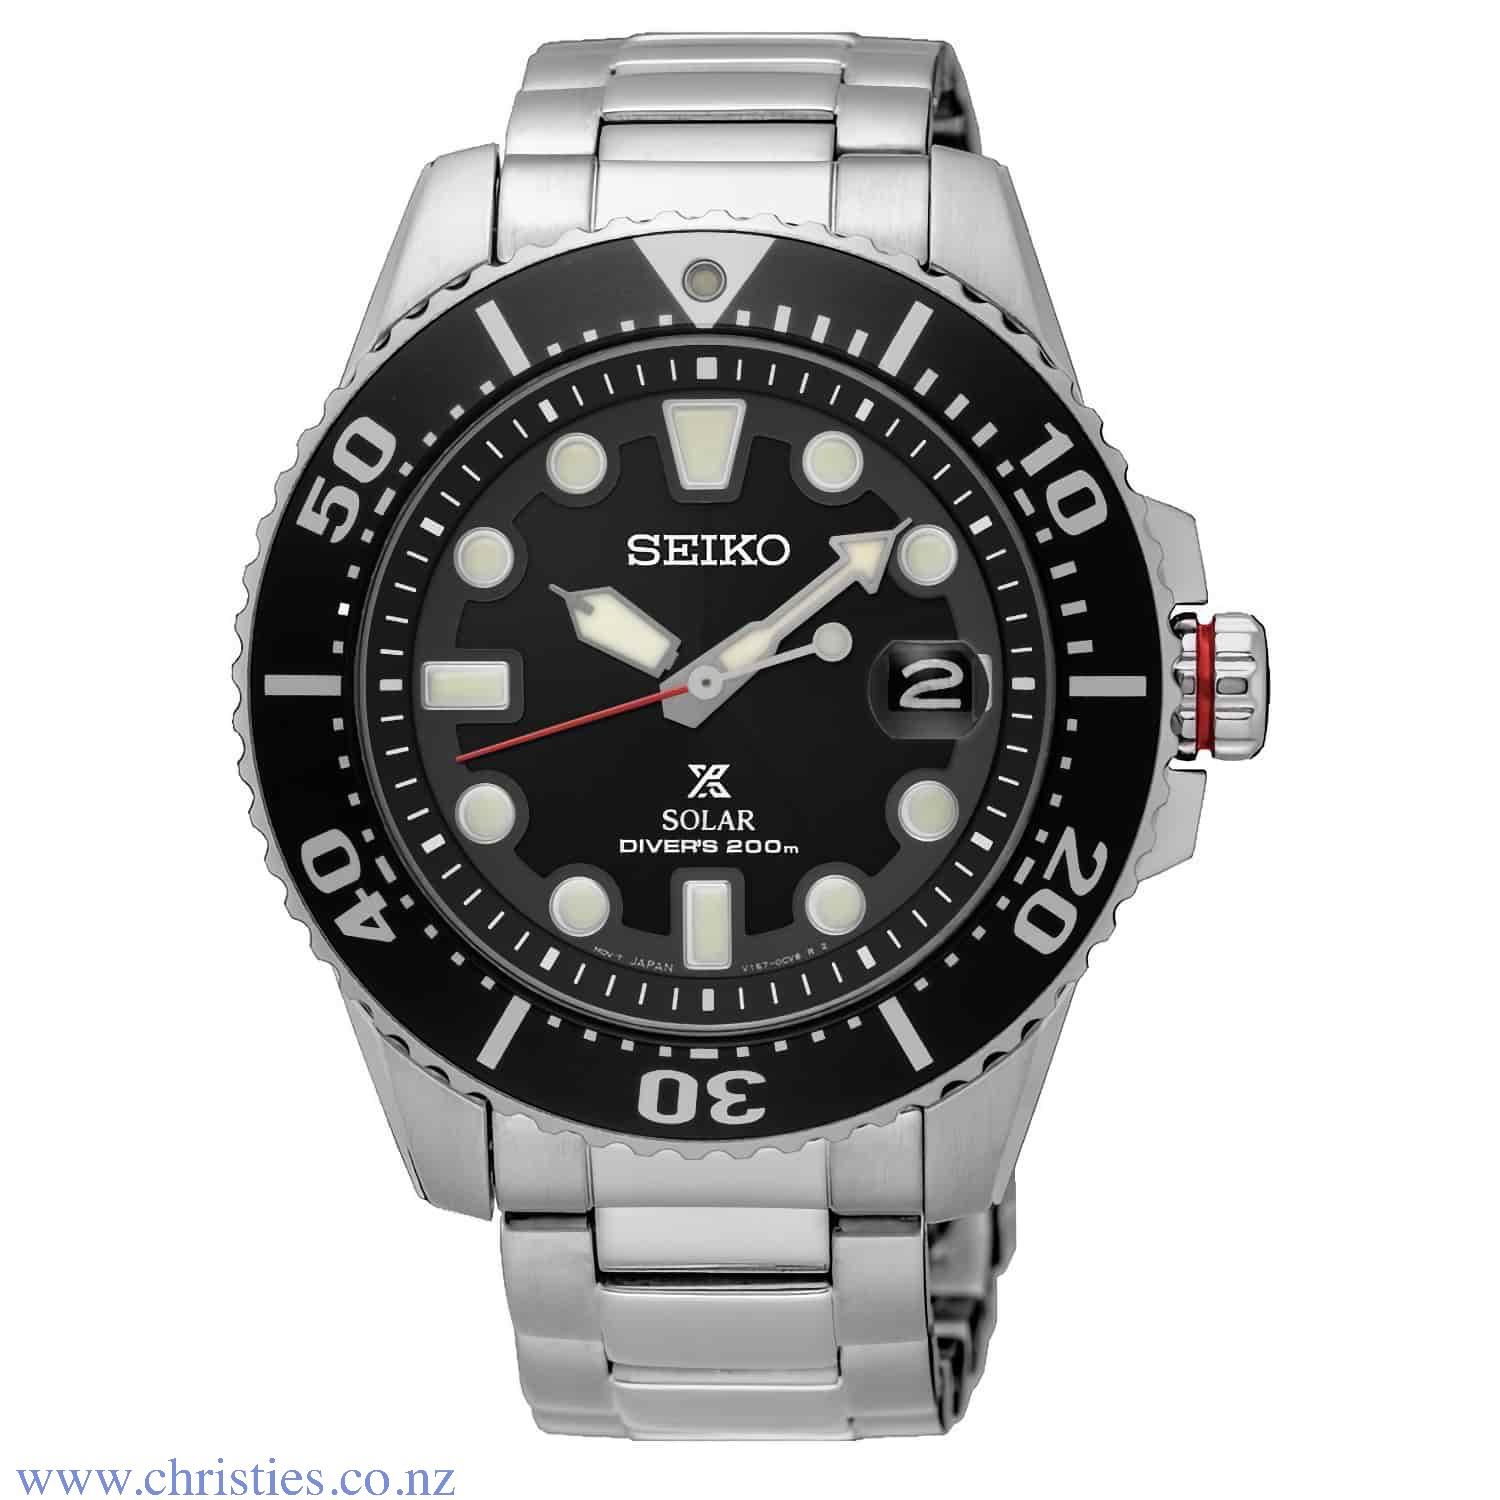 SNE551P Seiko DIVERS Solar Watch. Seiko Stainless Steel Dive watch featuring a rotating bezel and is solar powered Humm -Buy Little things up to $1000 and choose 10 weekly or 5 fortnightly payments with no interest. Late payment fee of $10 will @christies